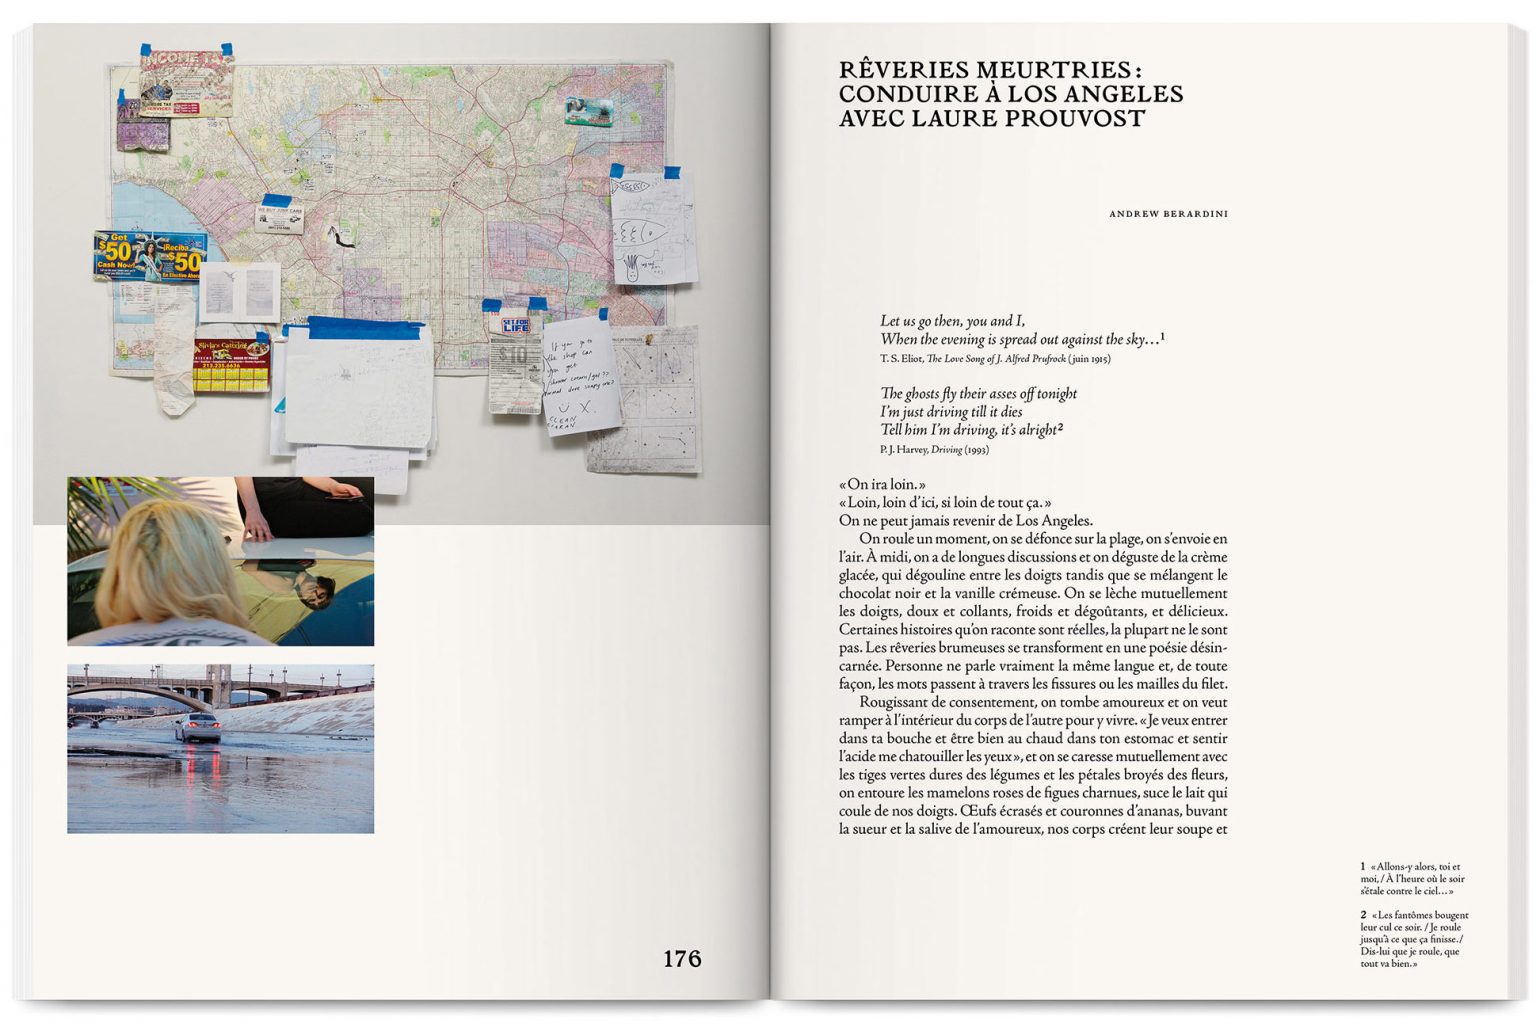 Exhibition catalogue and monograph for Laure Prouvost's show Deep See Blue Surrounding you at Venice Biennale, French Pavilion, Institut Français, designed by In the shade of a tree studio, founded by Sophie Demay and Maël Fournier Comte